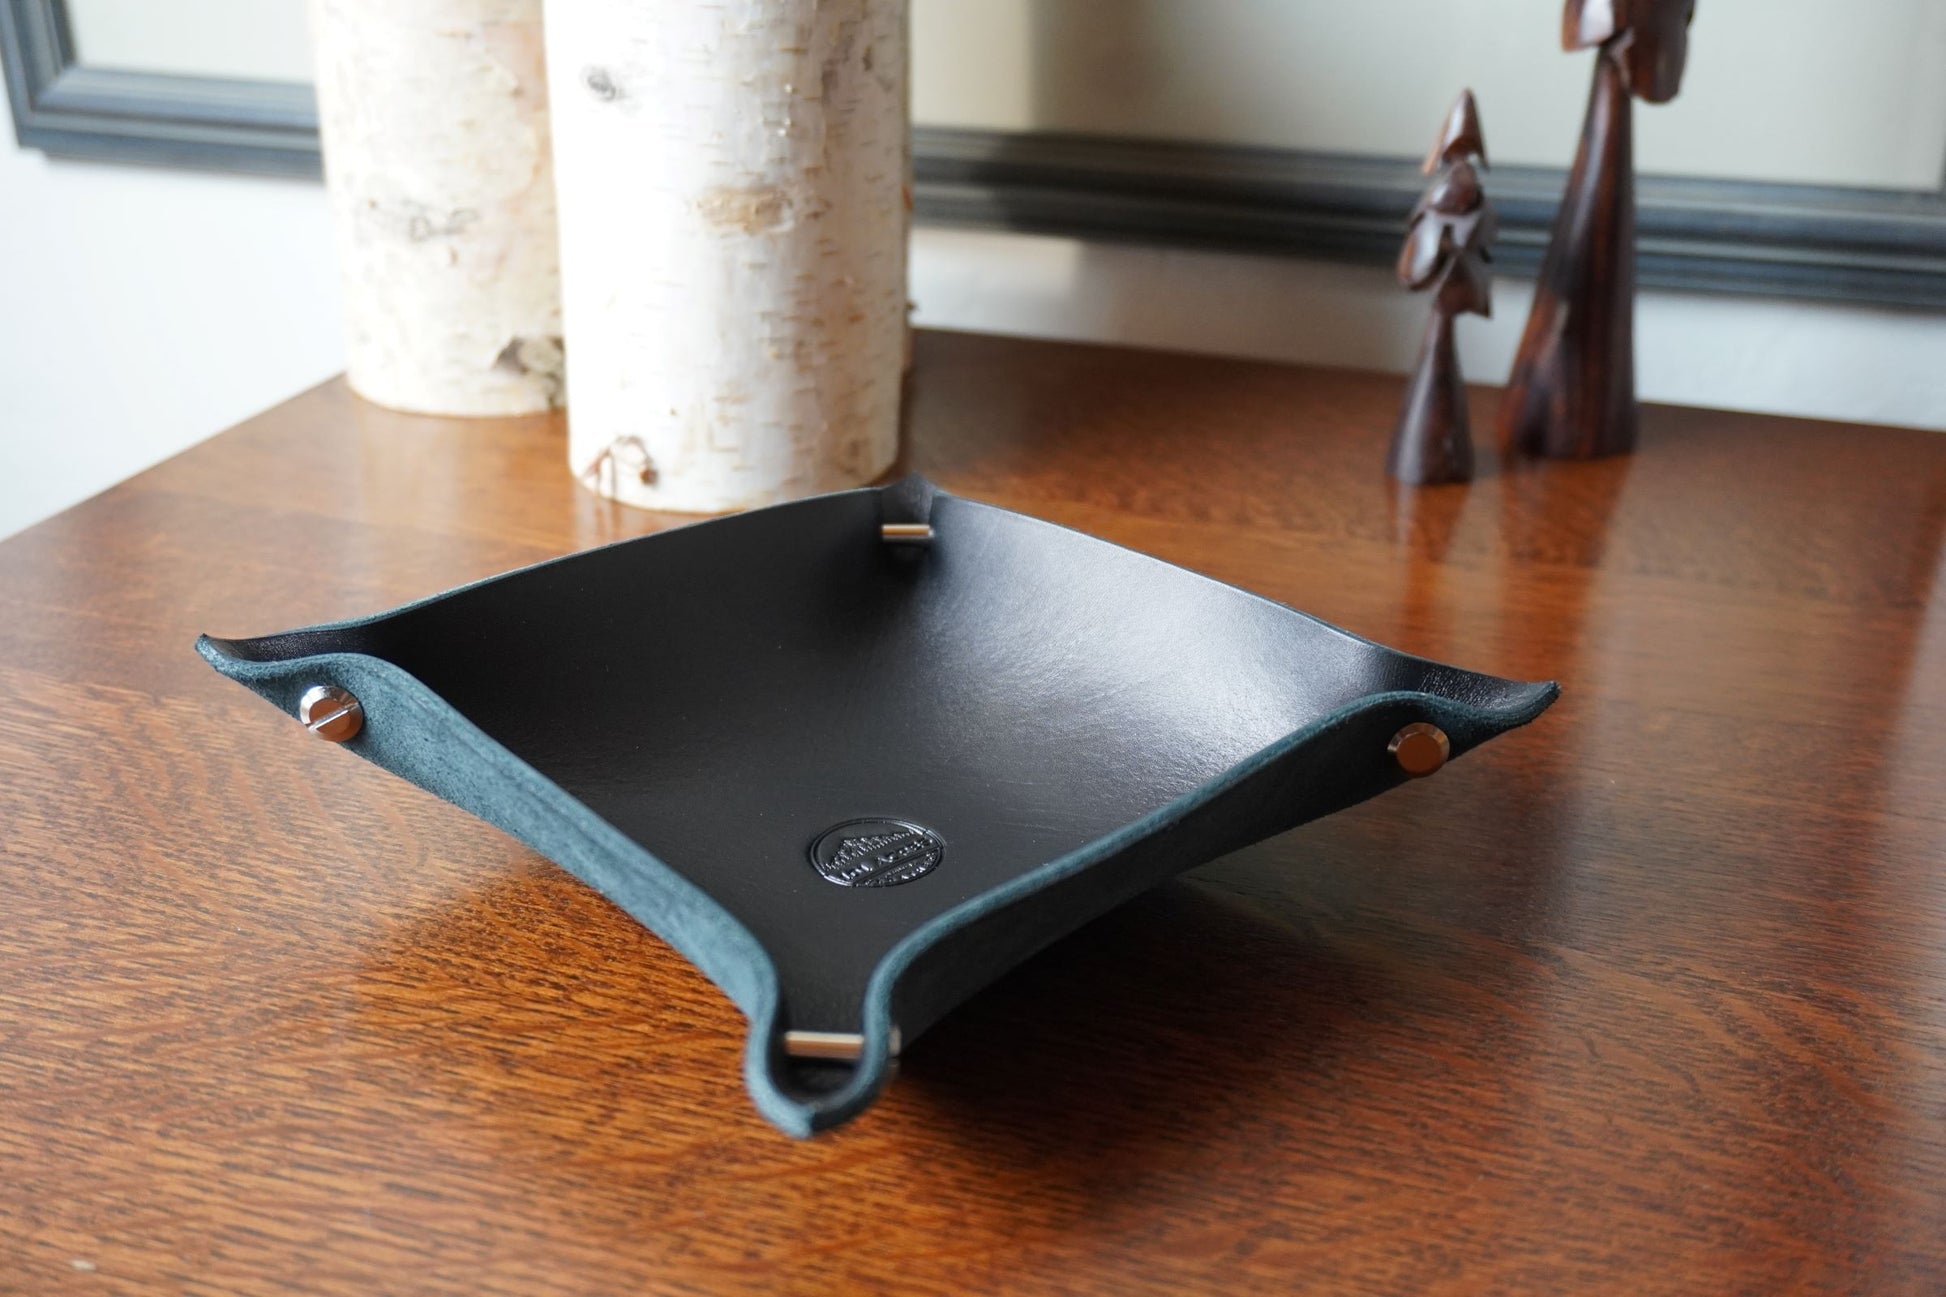 Valet Tray – 101 Acres Leather